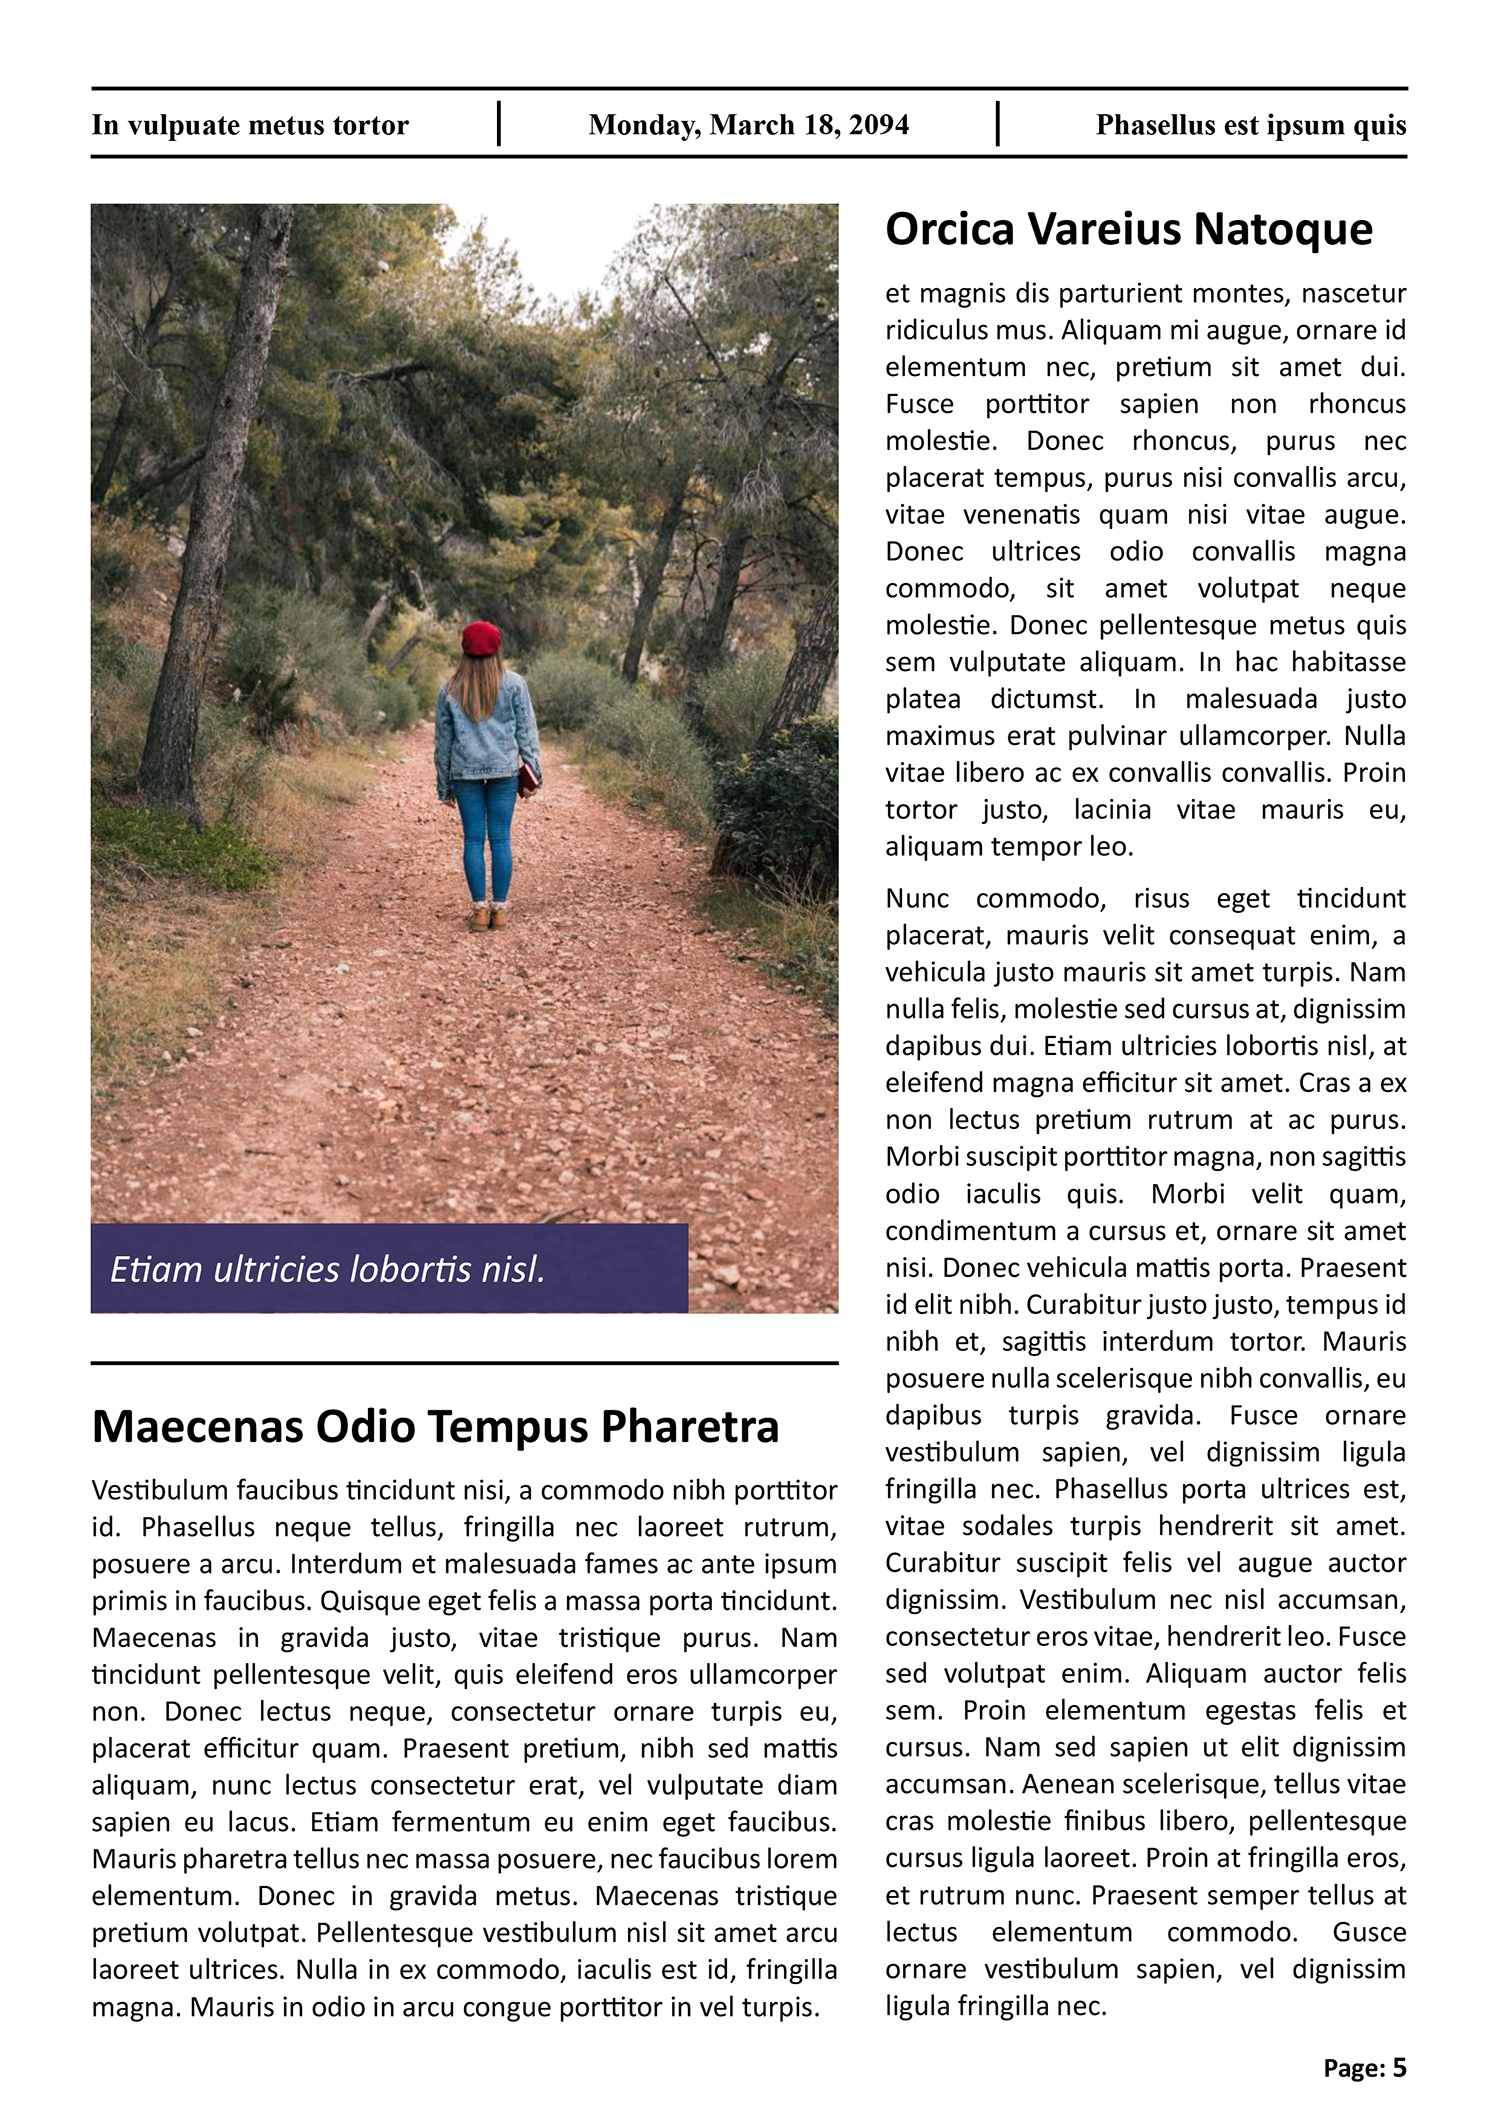 Travel Themed Newspaper Article Template - Page 05